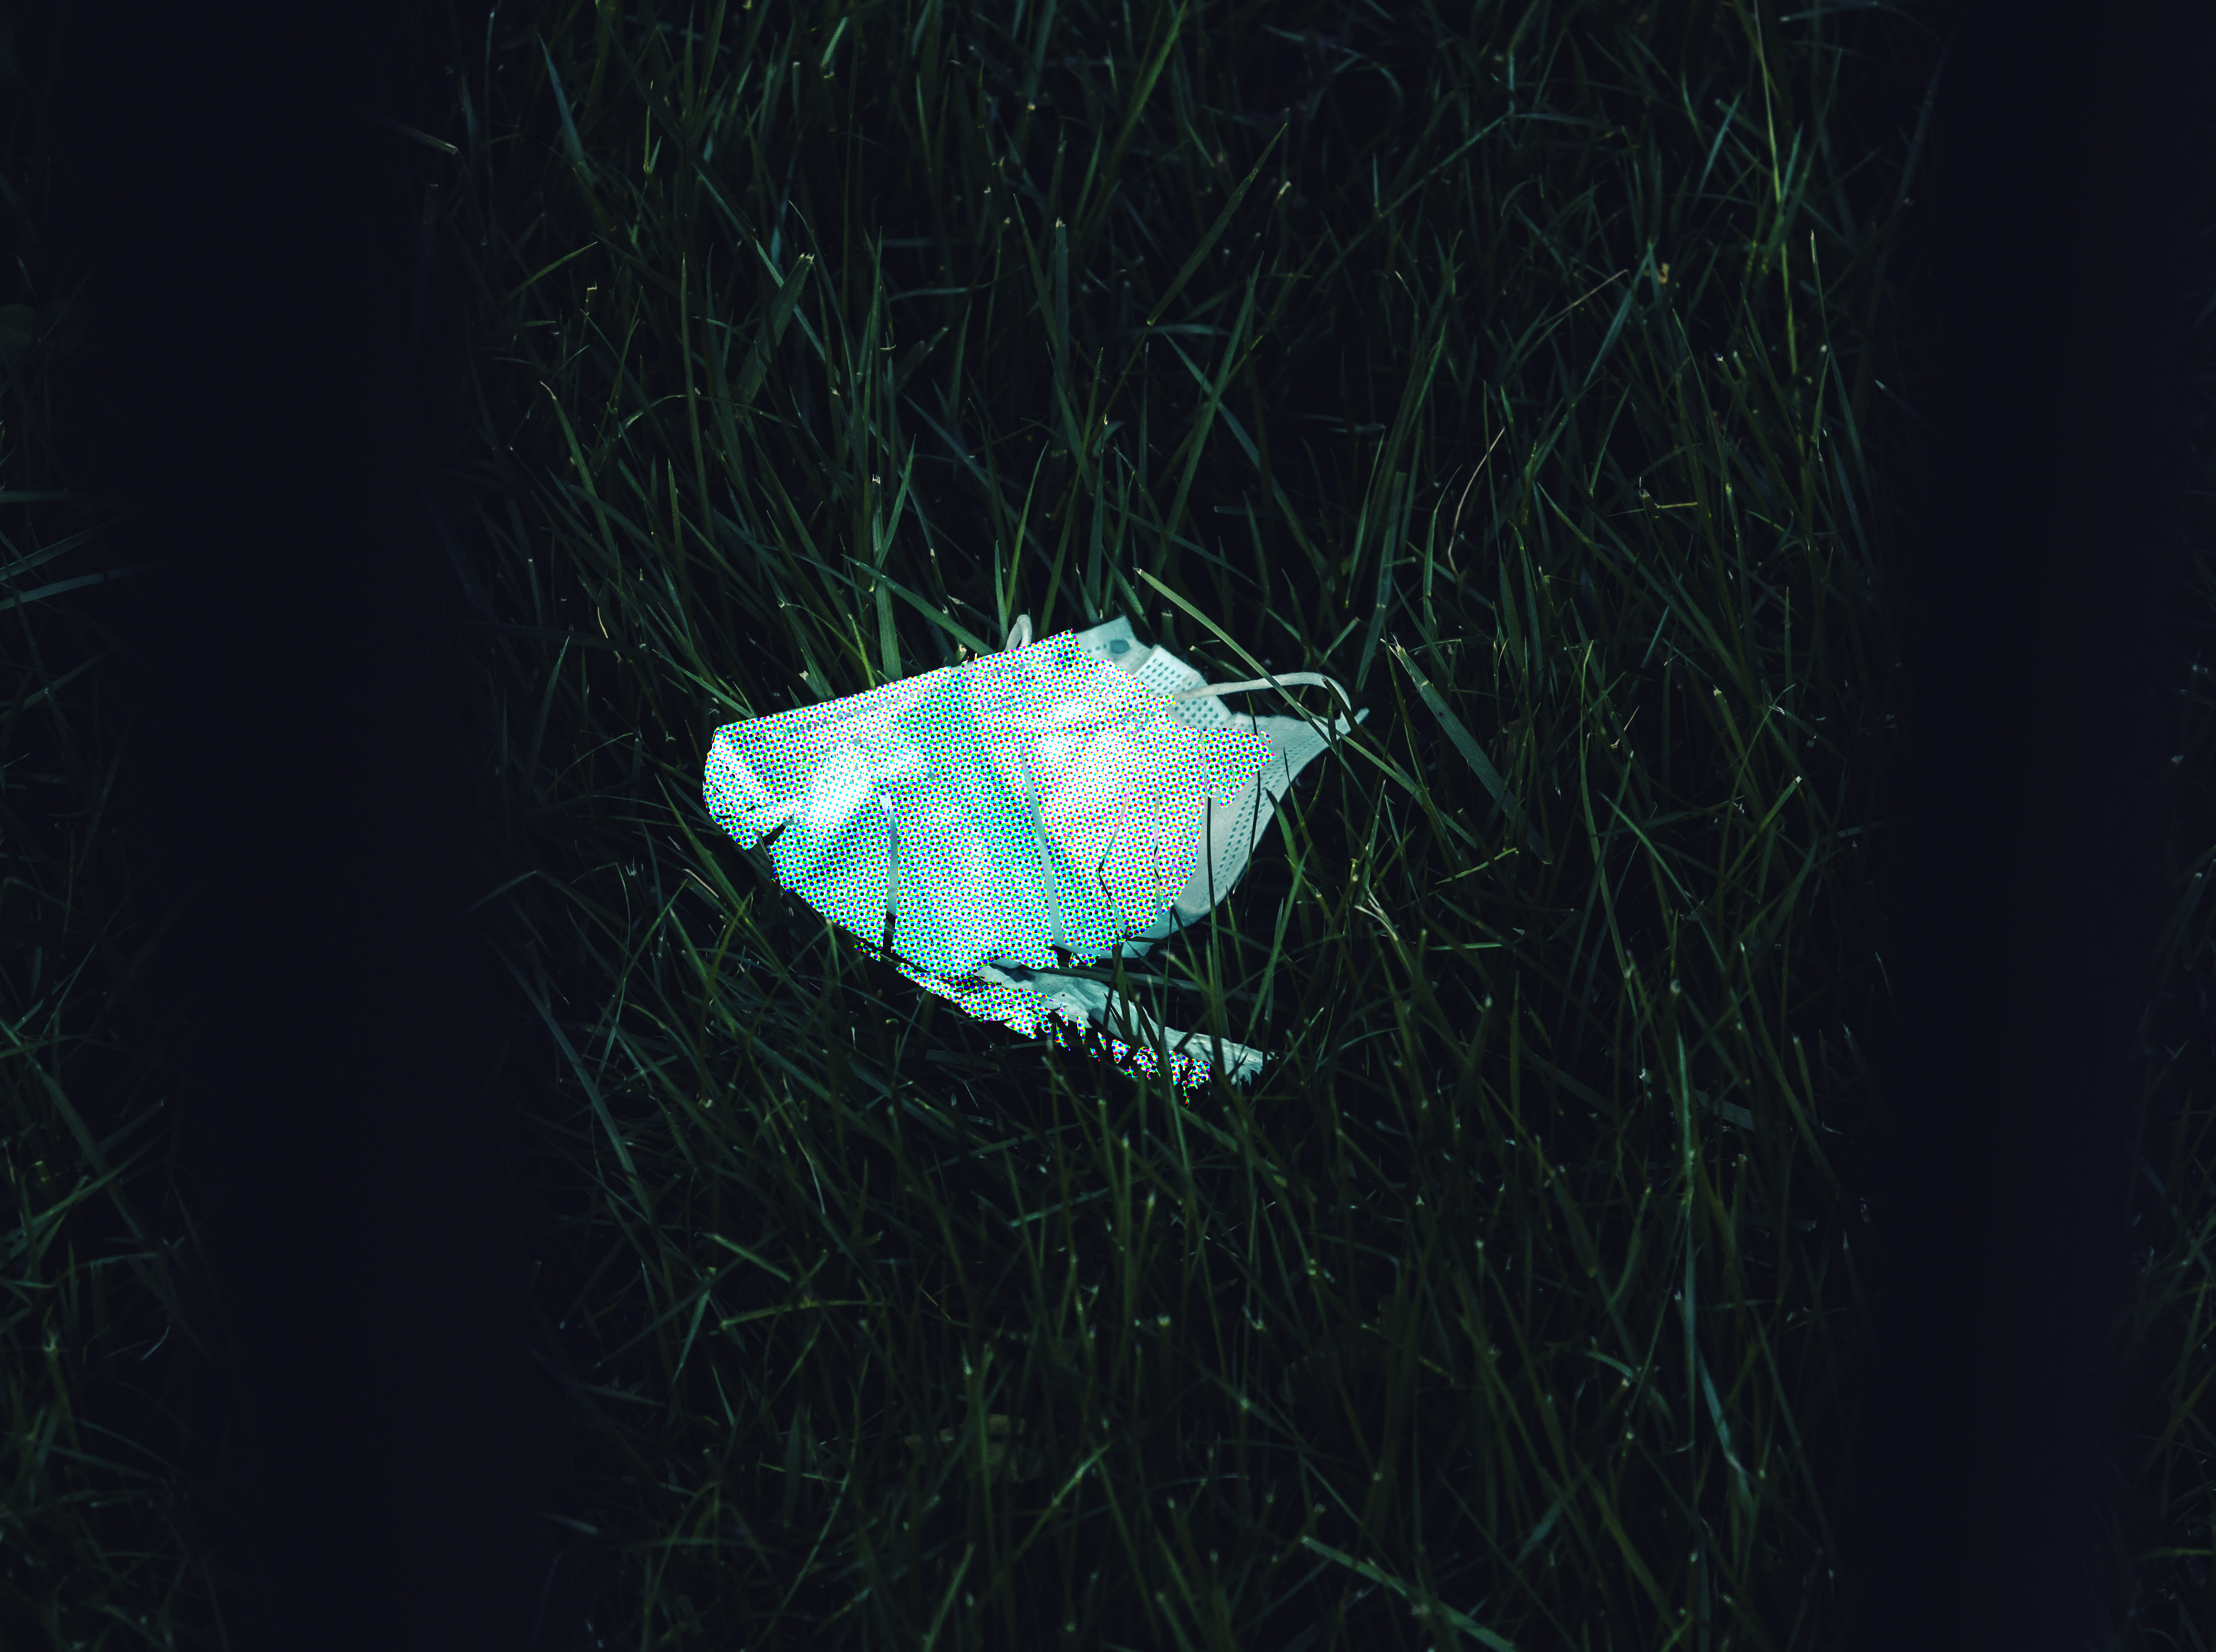 Edited picture of a discarded face mask on ground.